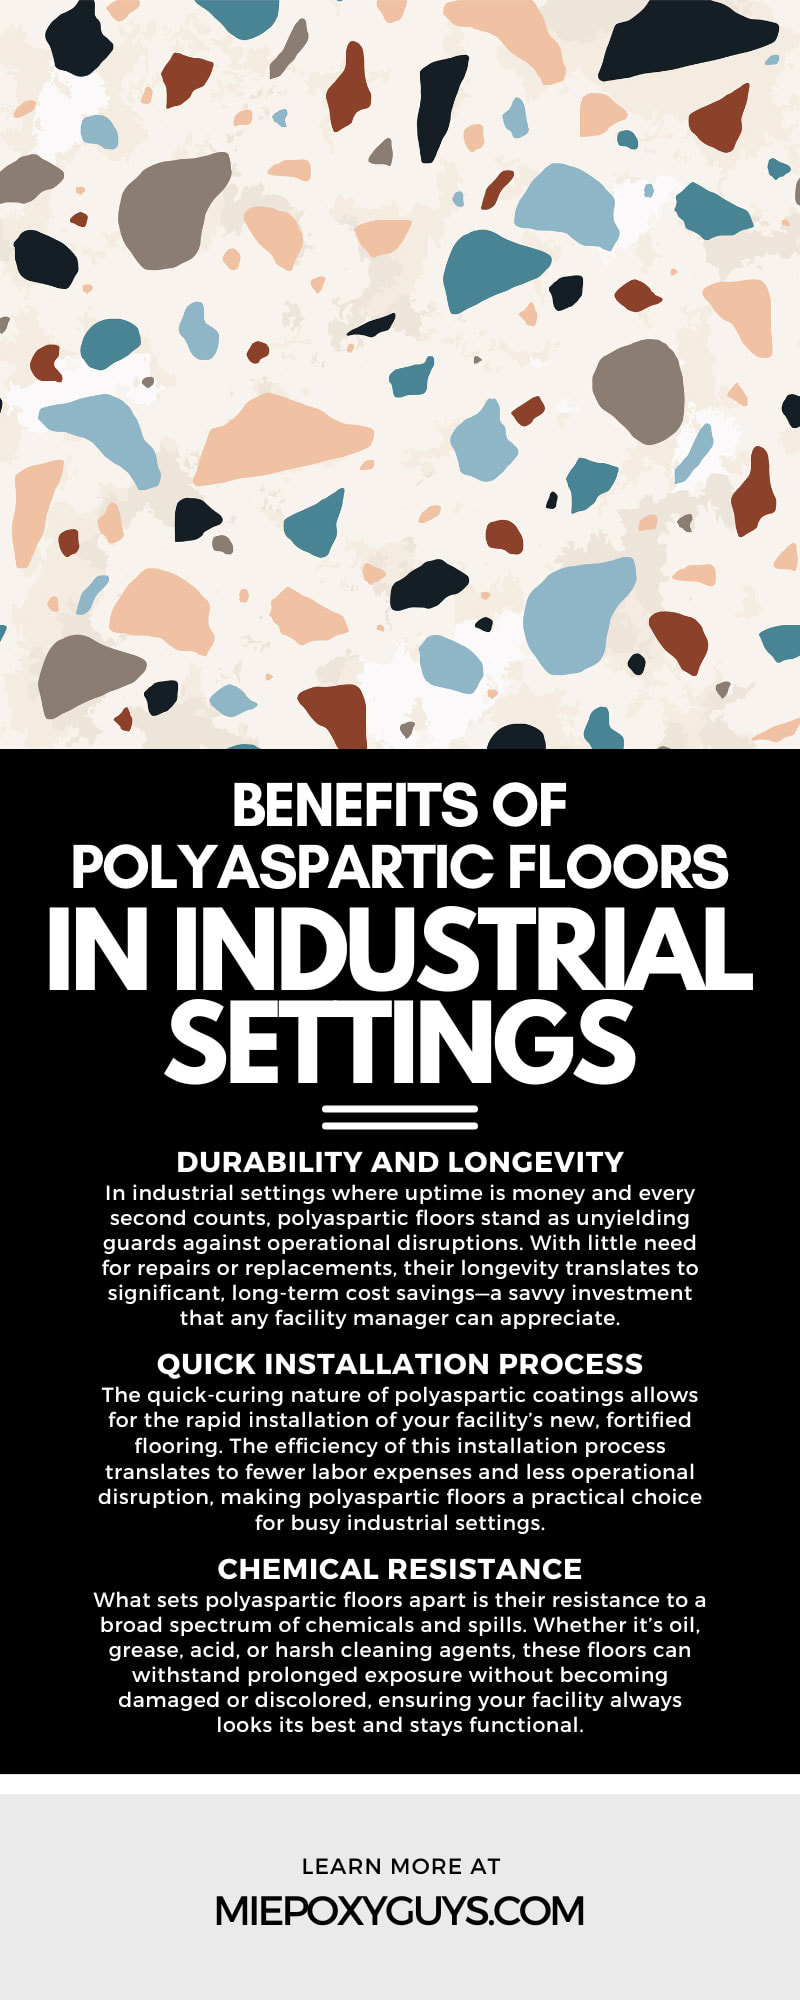 11 Benefits of Polyaspartic Floors in Industrial Settings